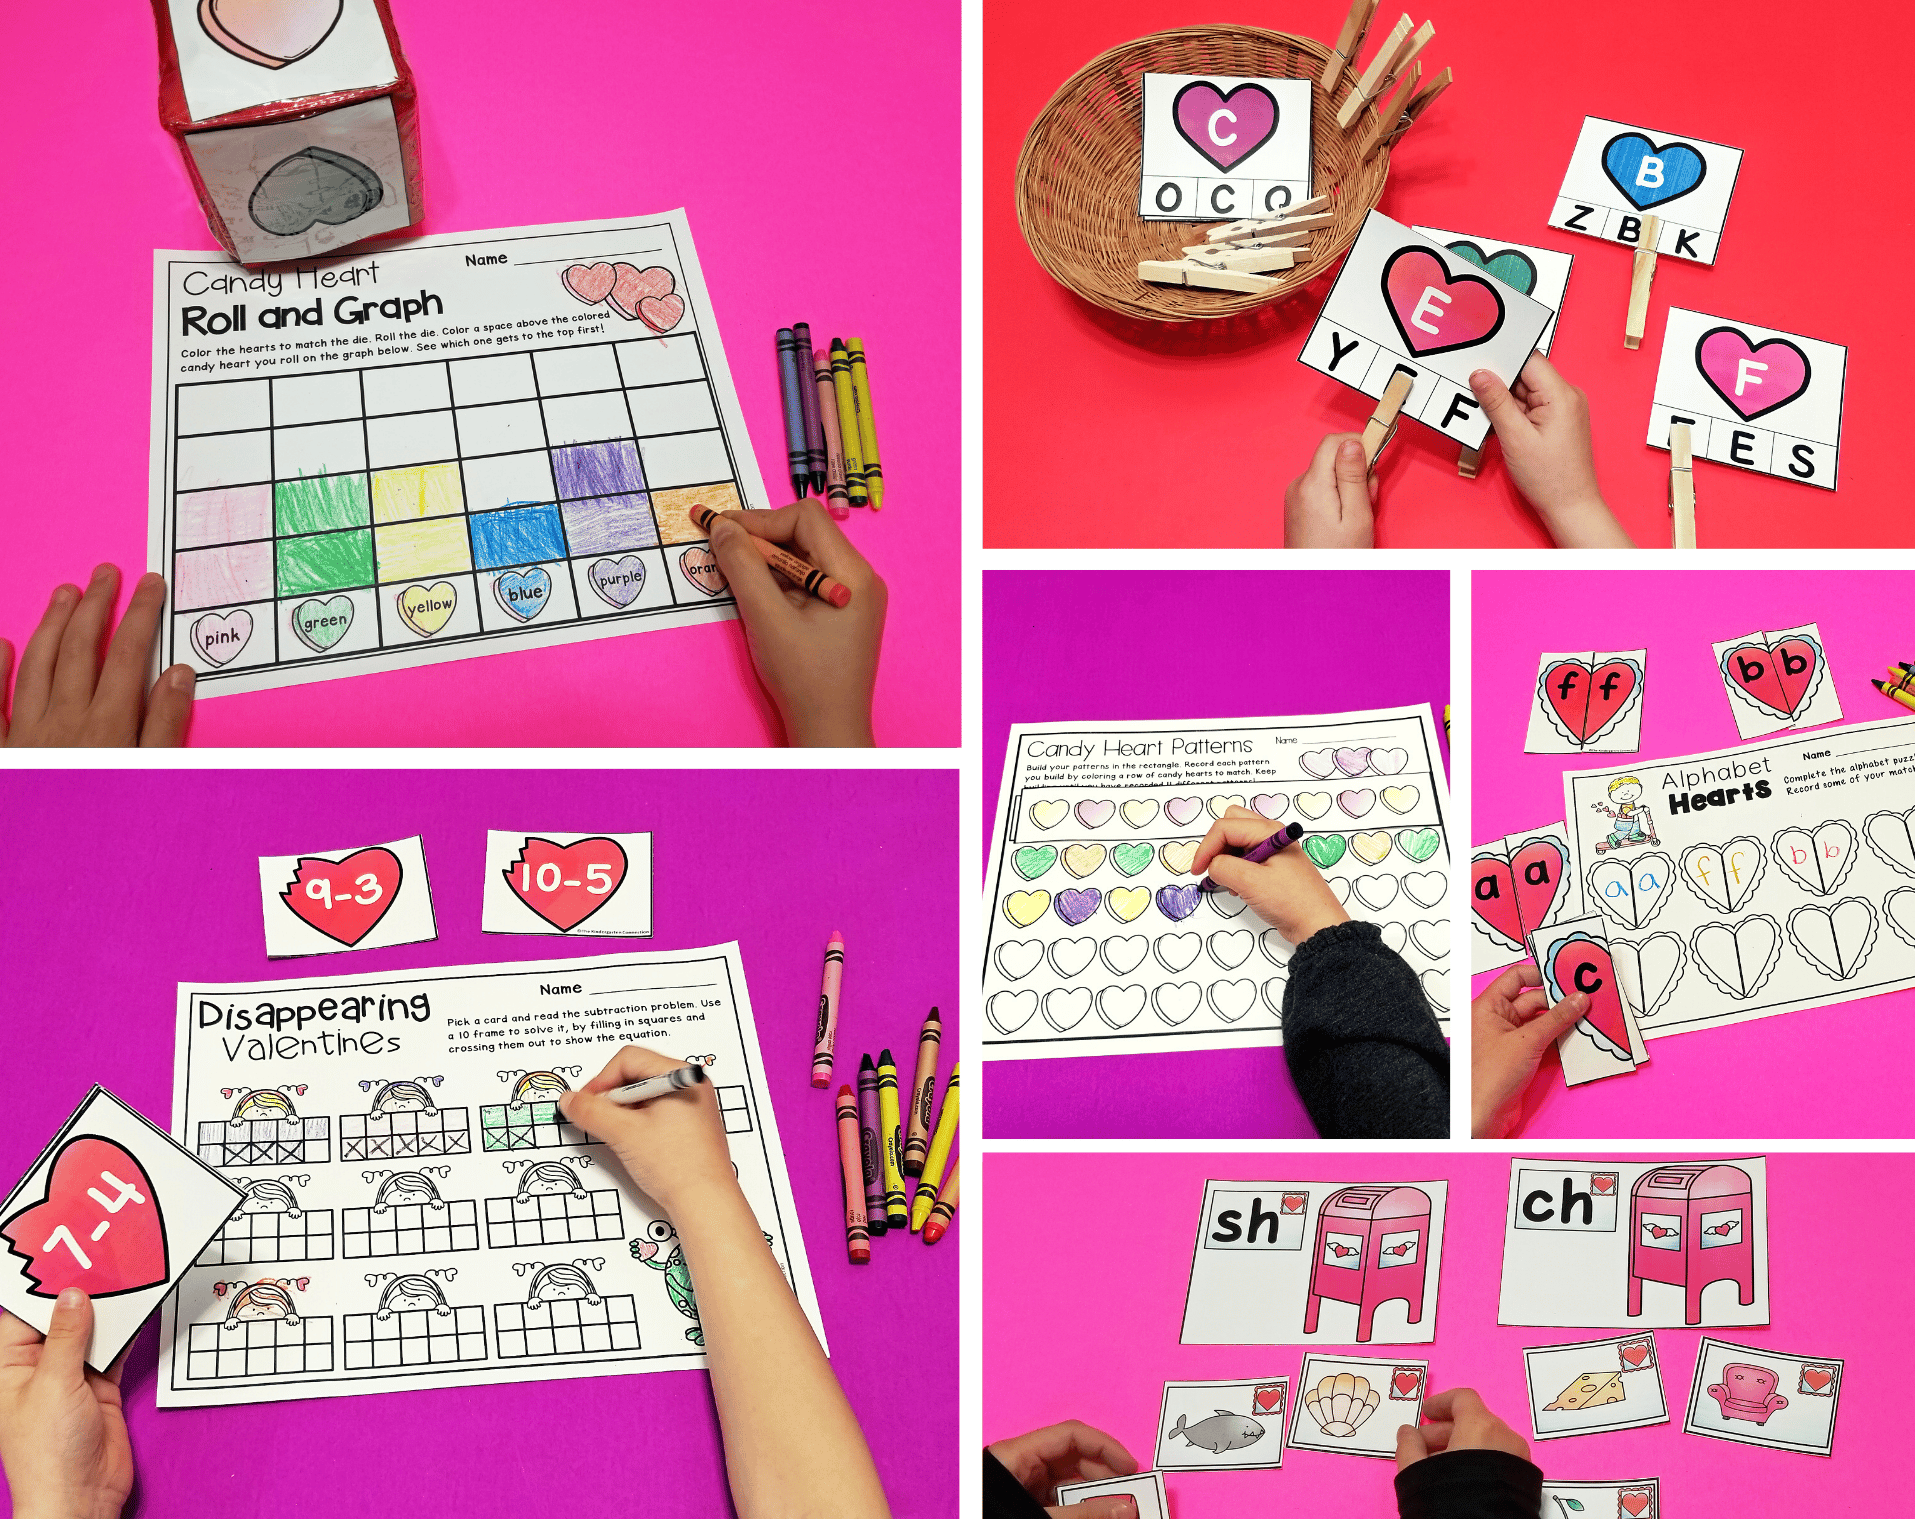 Valentine's Day Math and Literacy Centers